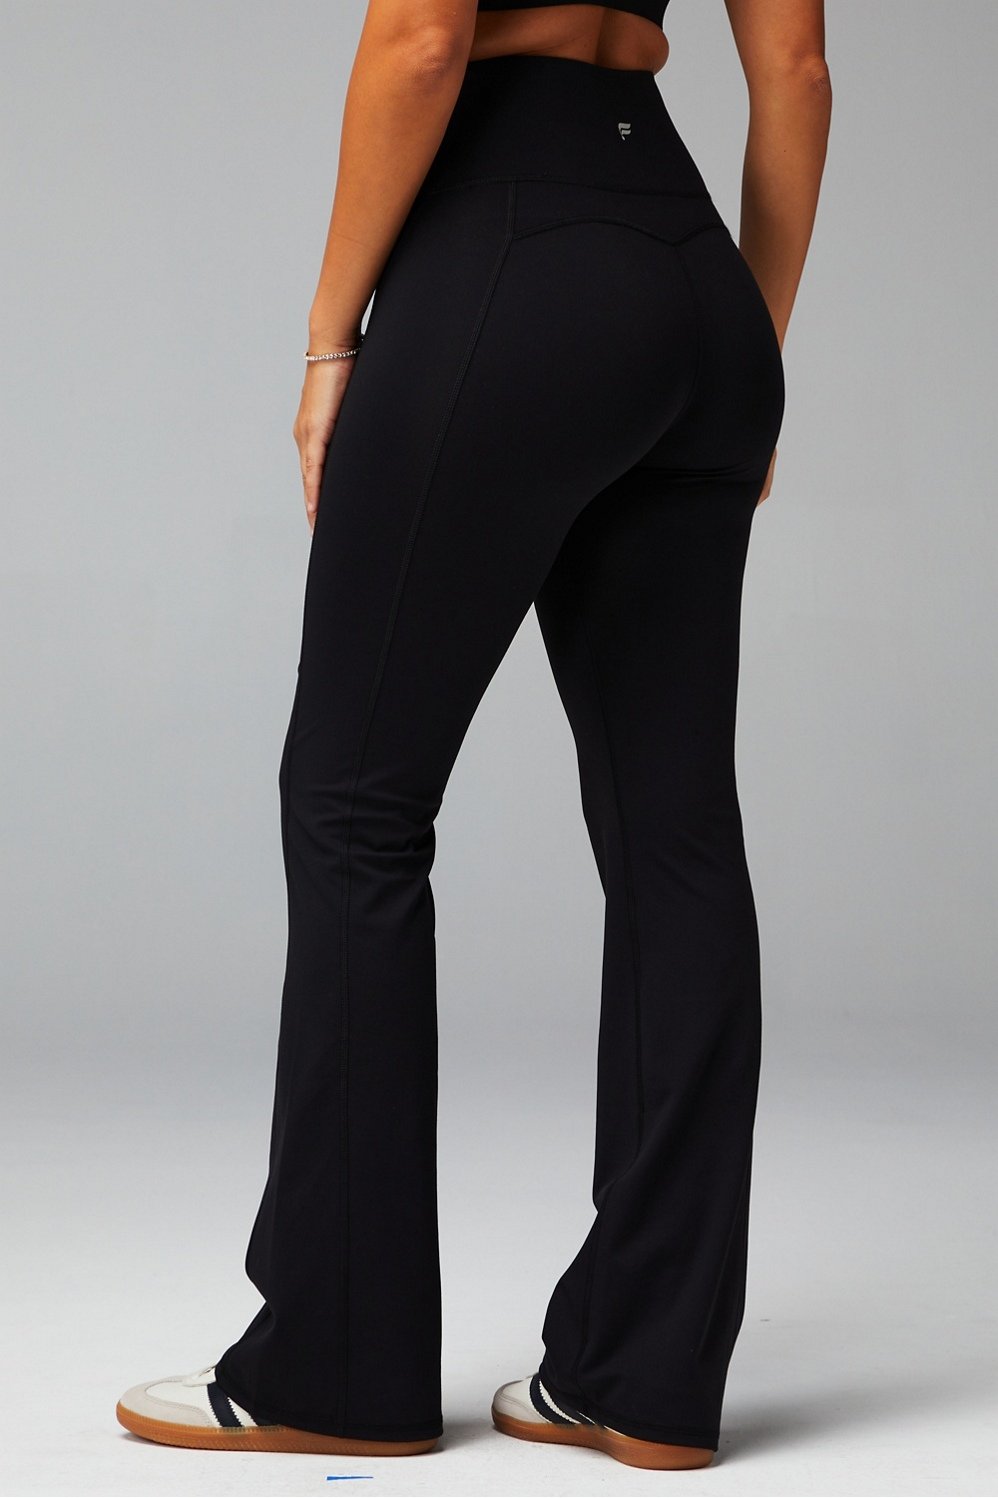 Fabletics Ultra High-waisted Pureluxe Pant Black Flare Leggings